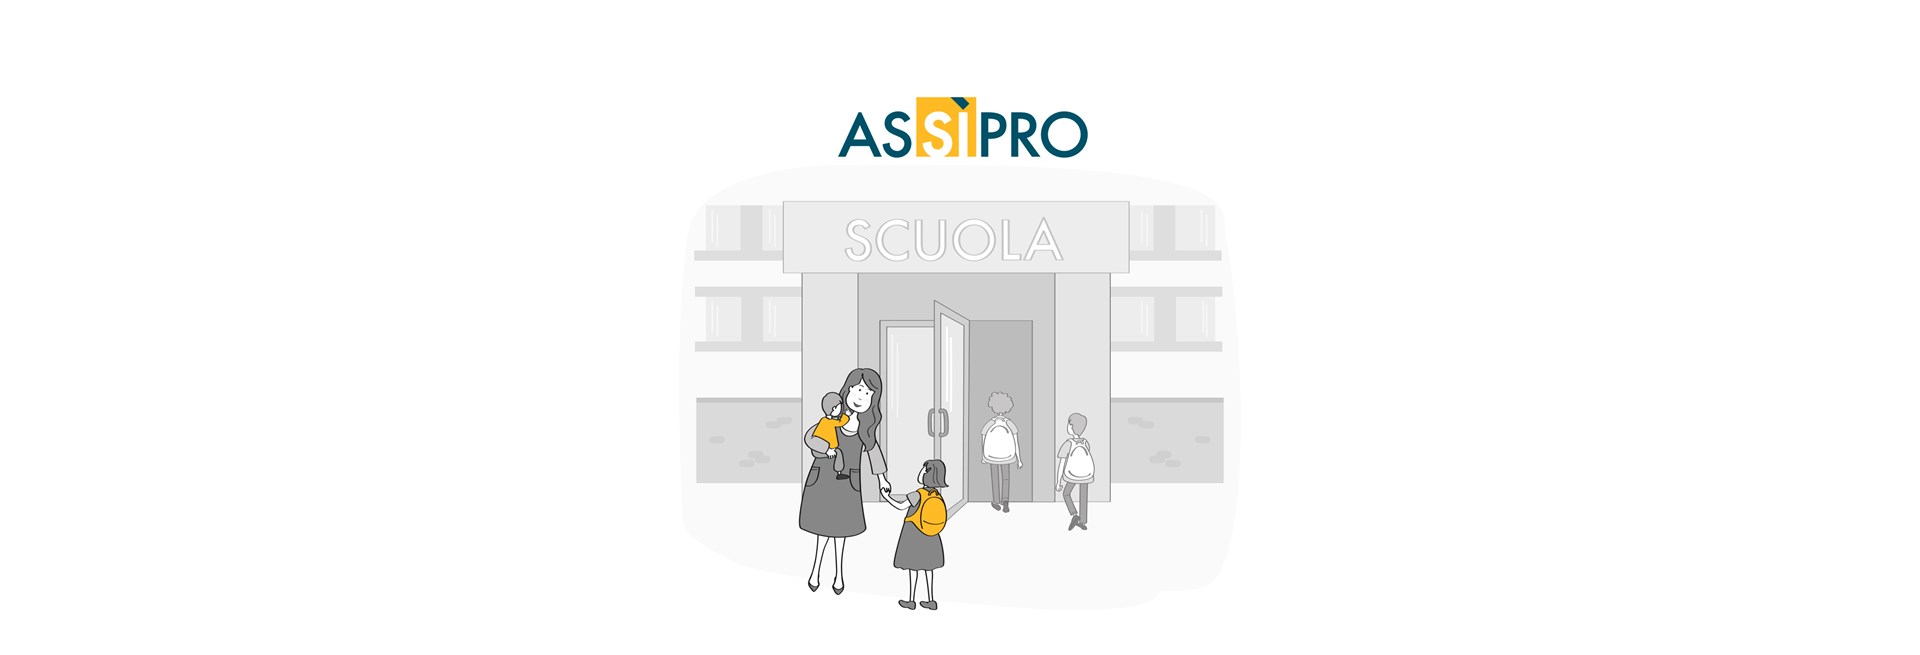 assipro